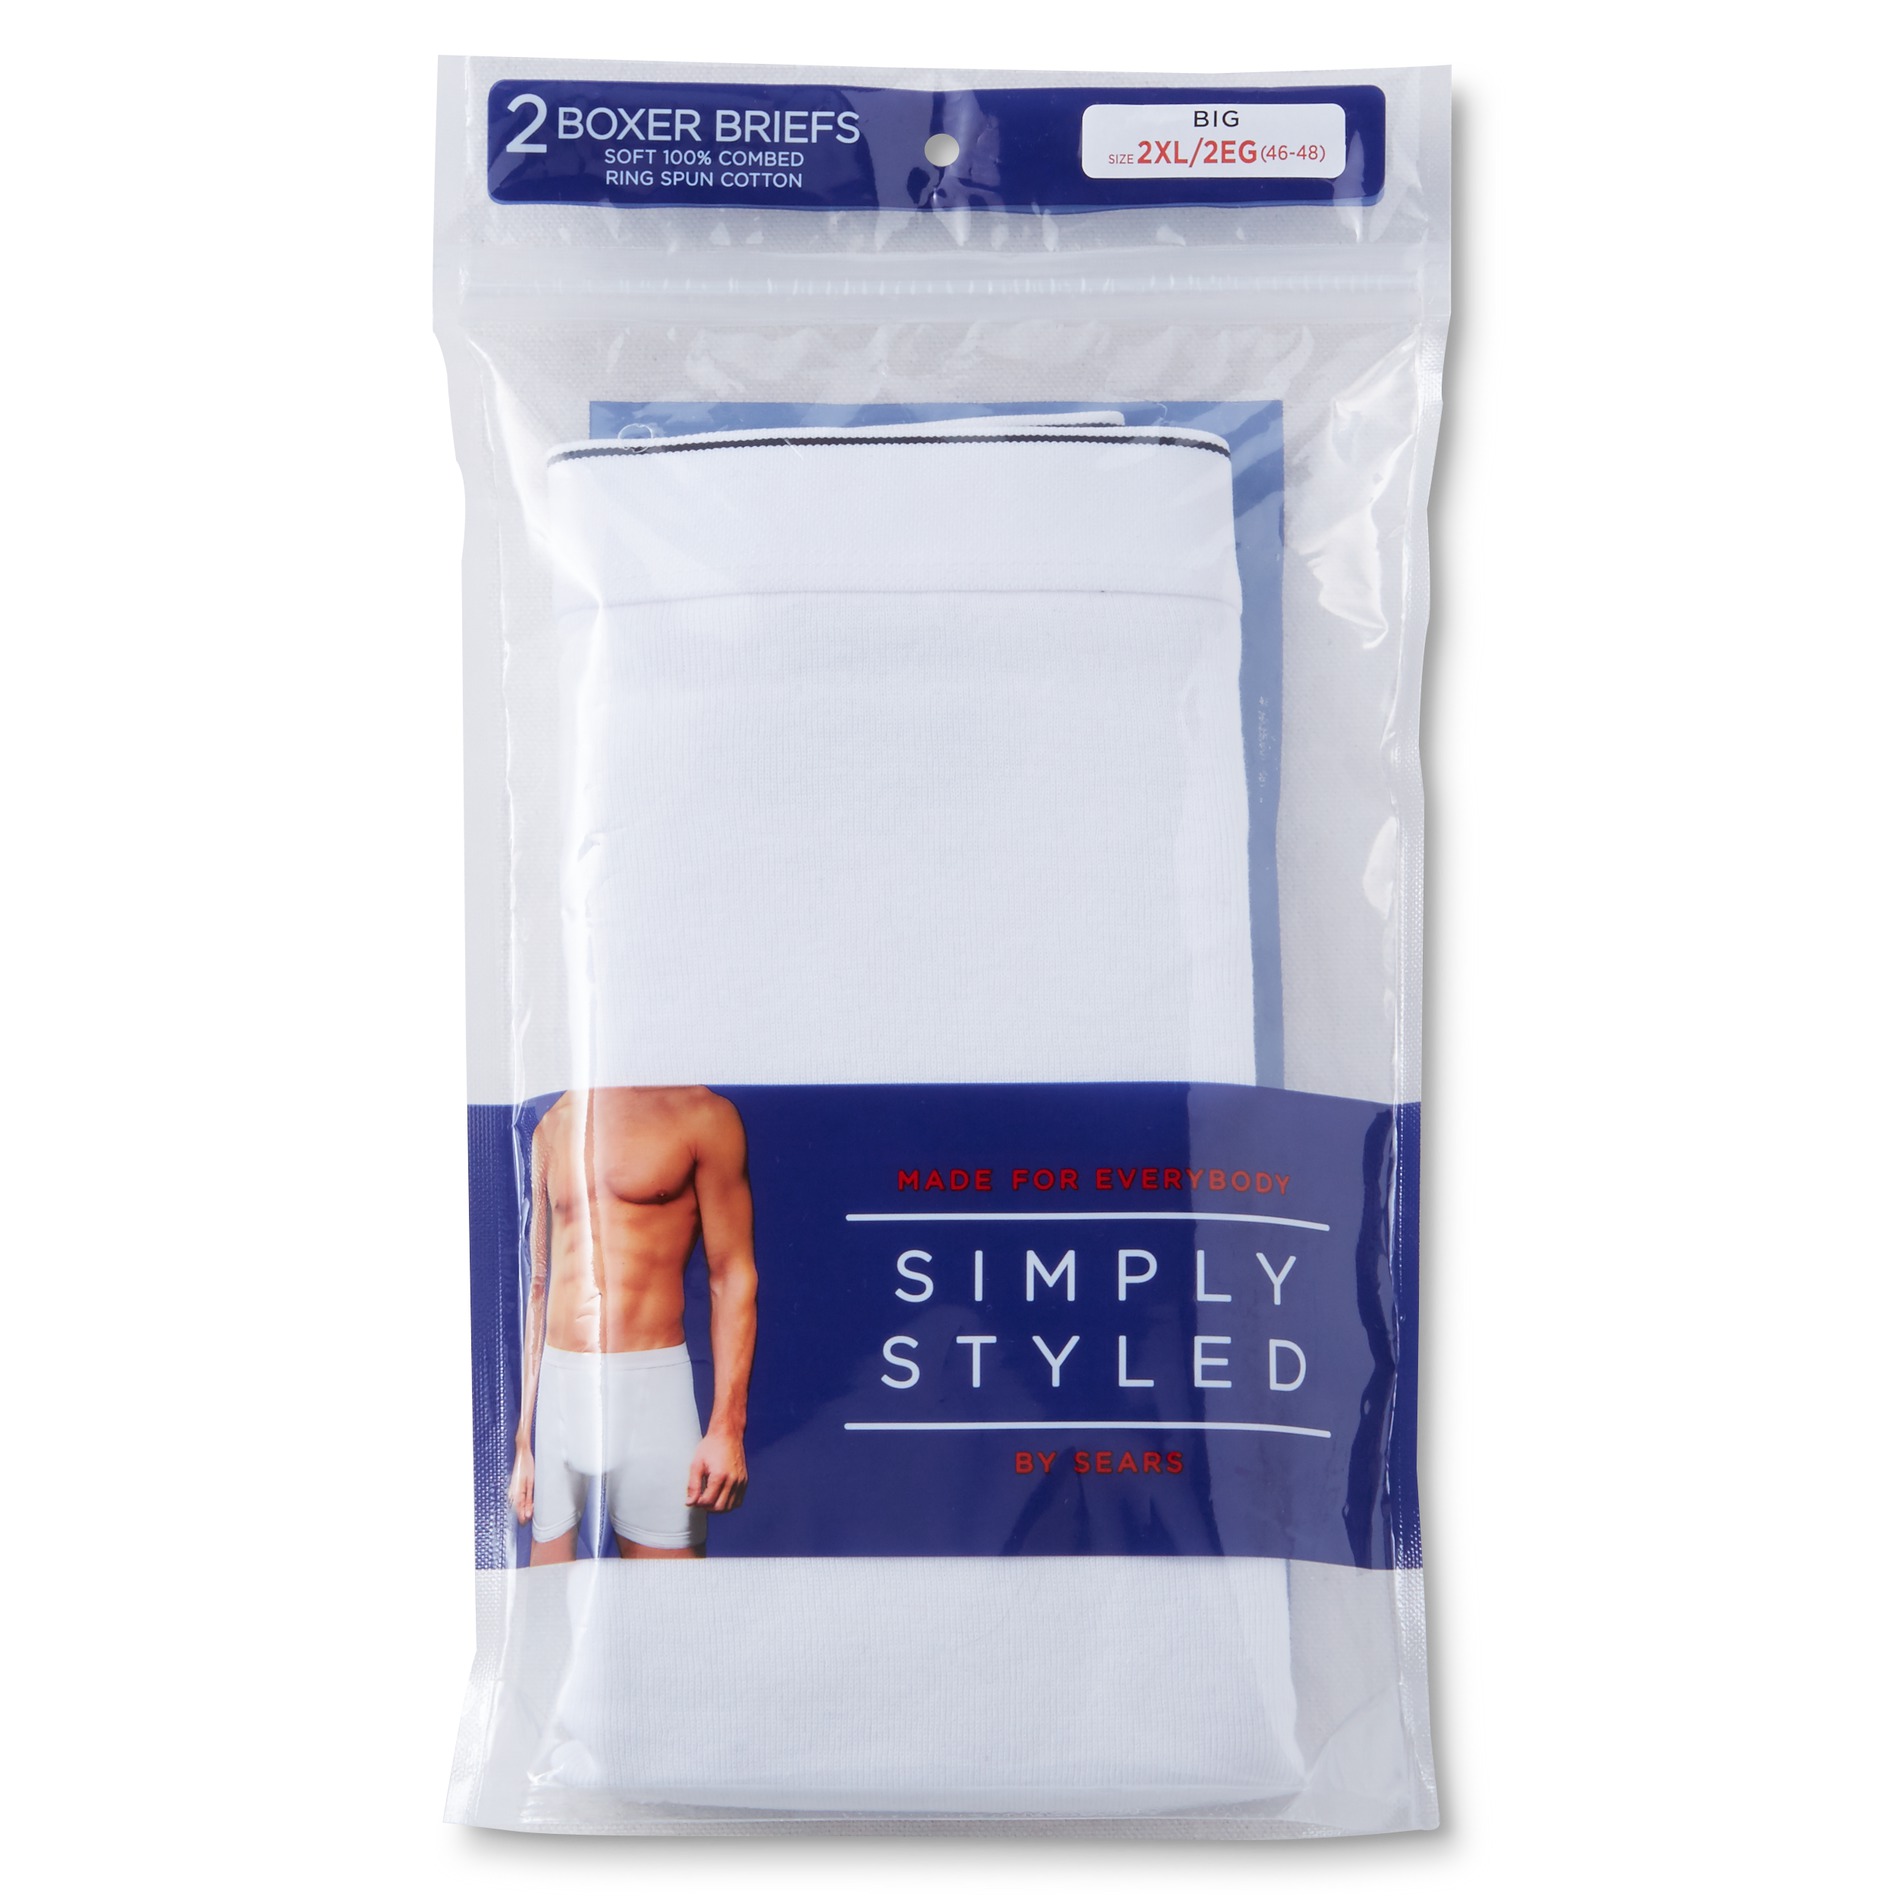 Simply Styled Men's Big & Tall 2-Pack Boxer Briefs